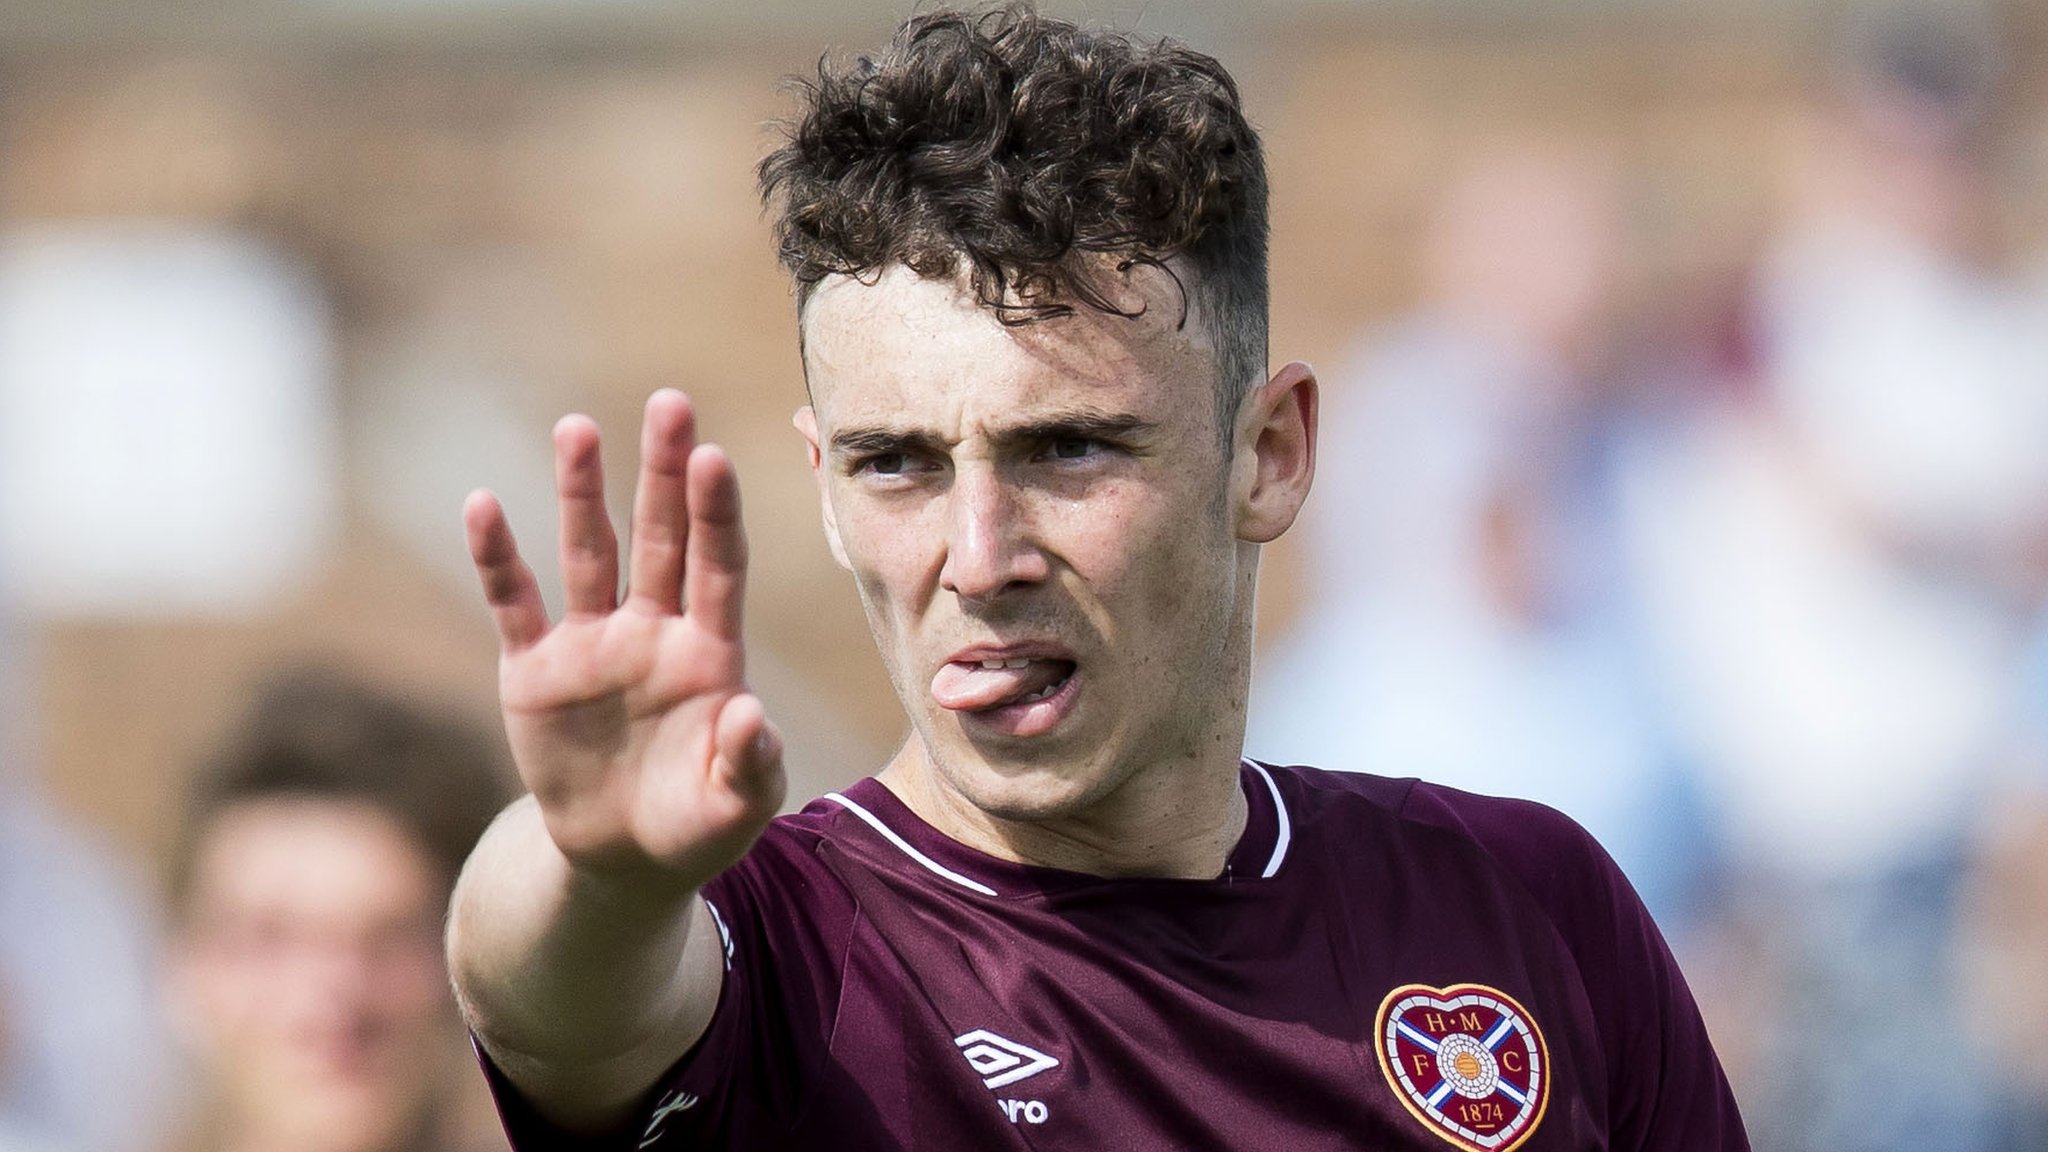 Hearts face action after fielding ineligible player in cup tie